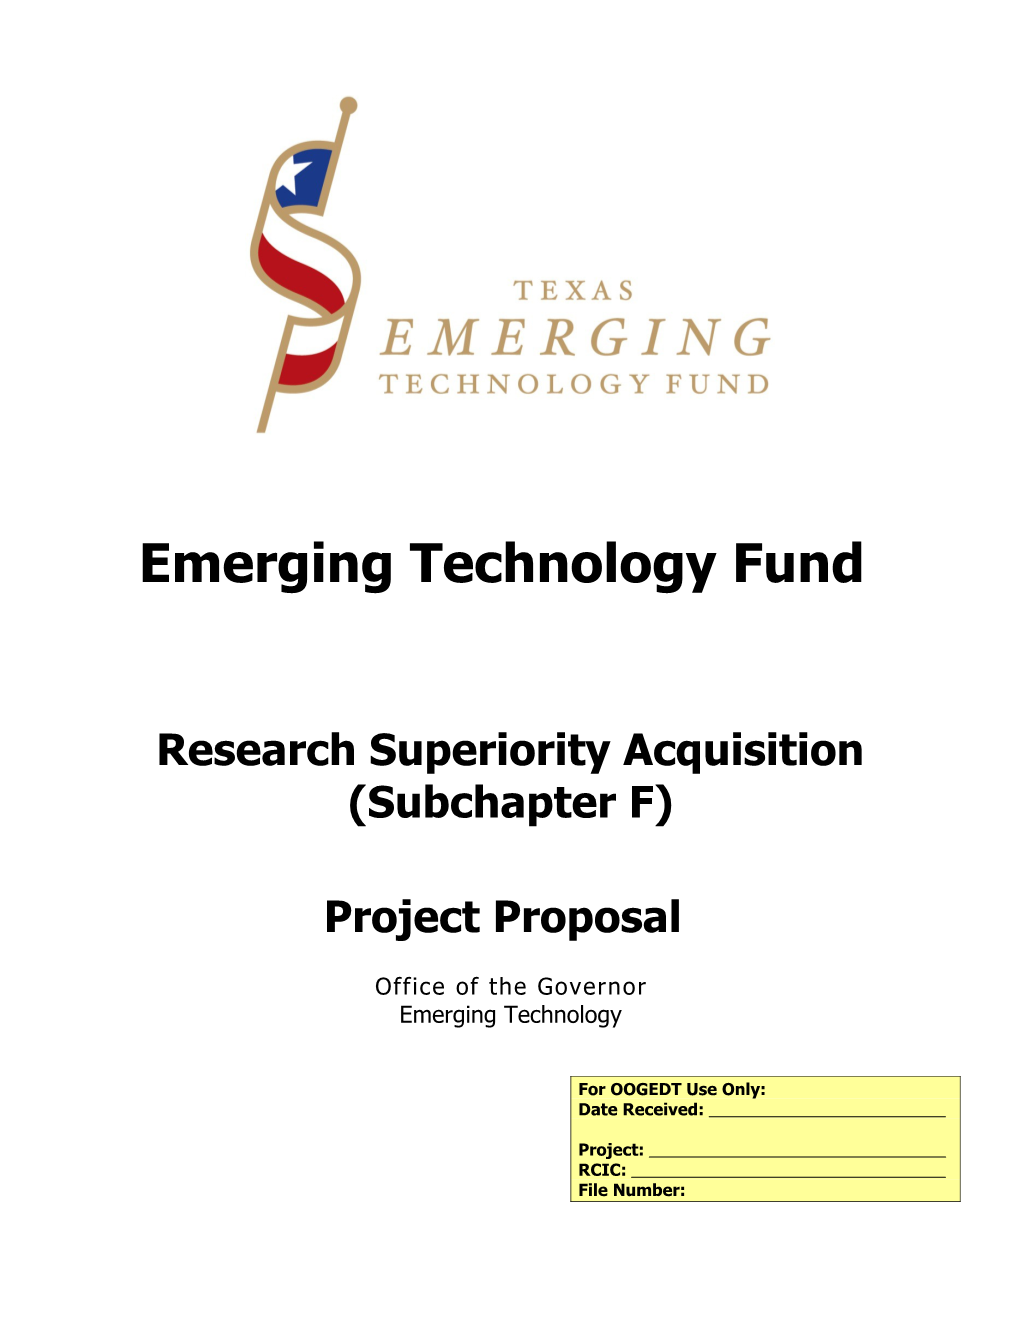 Emerging Technology Fund Proposal - Research Superiority Acquisition (Subchapter F)